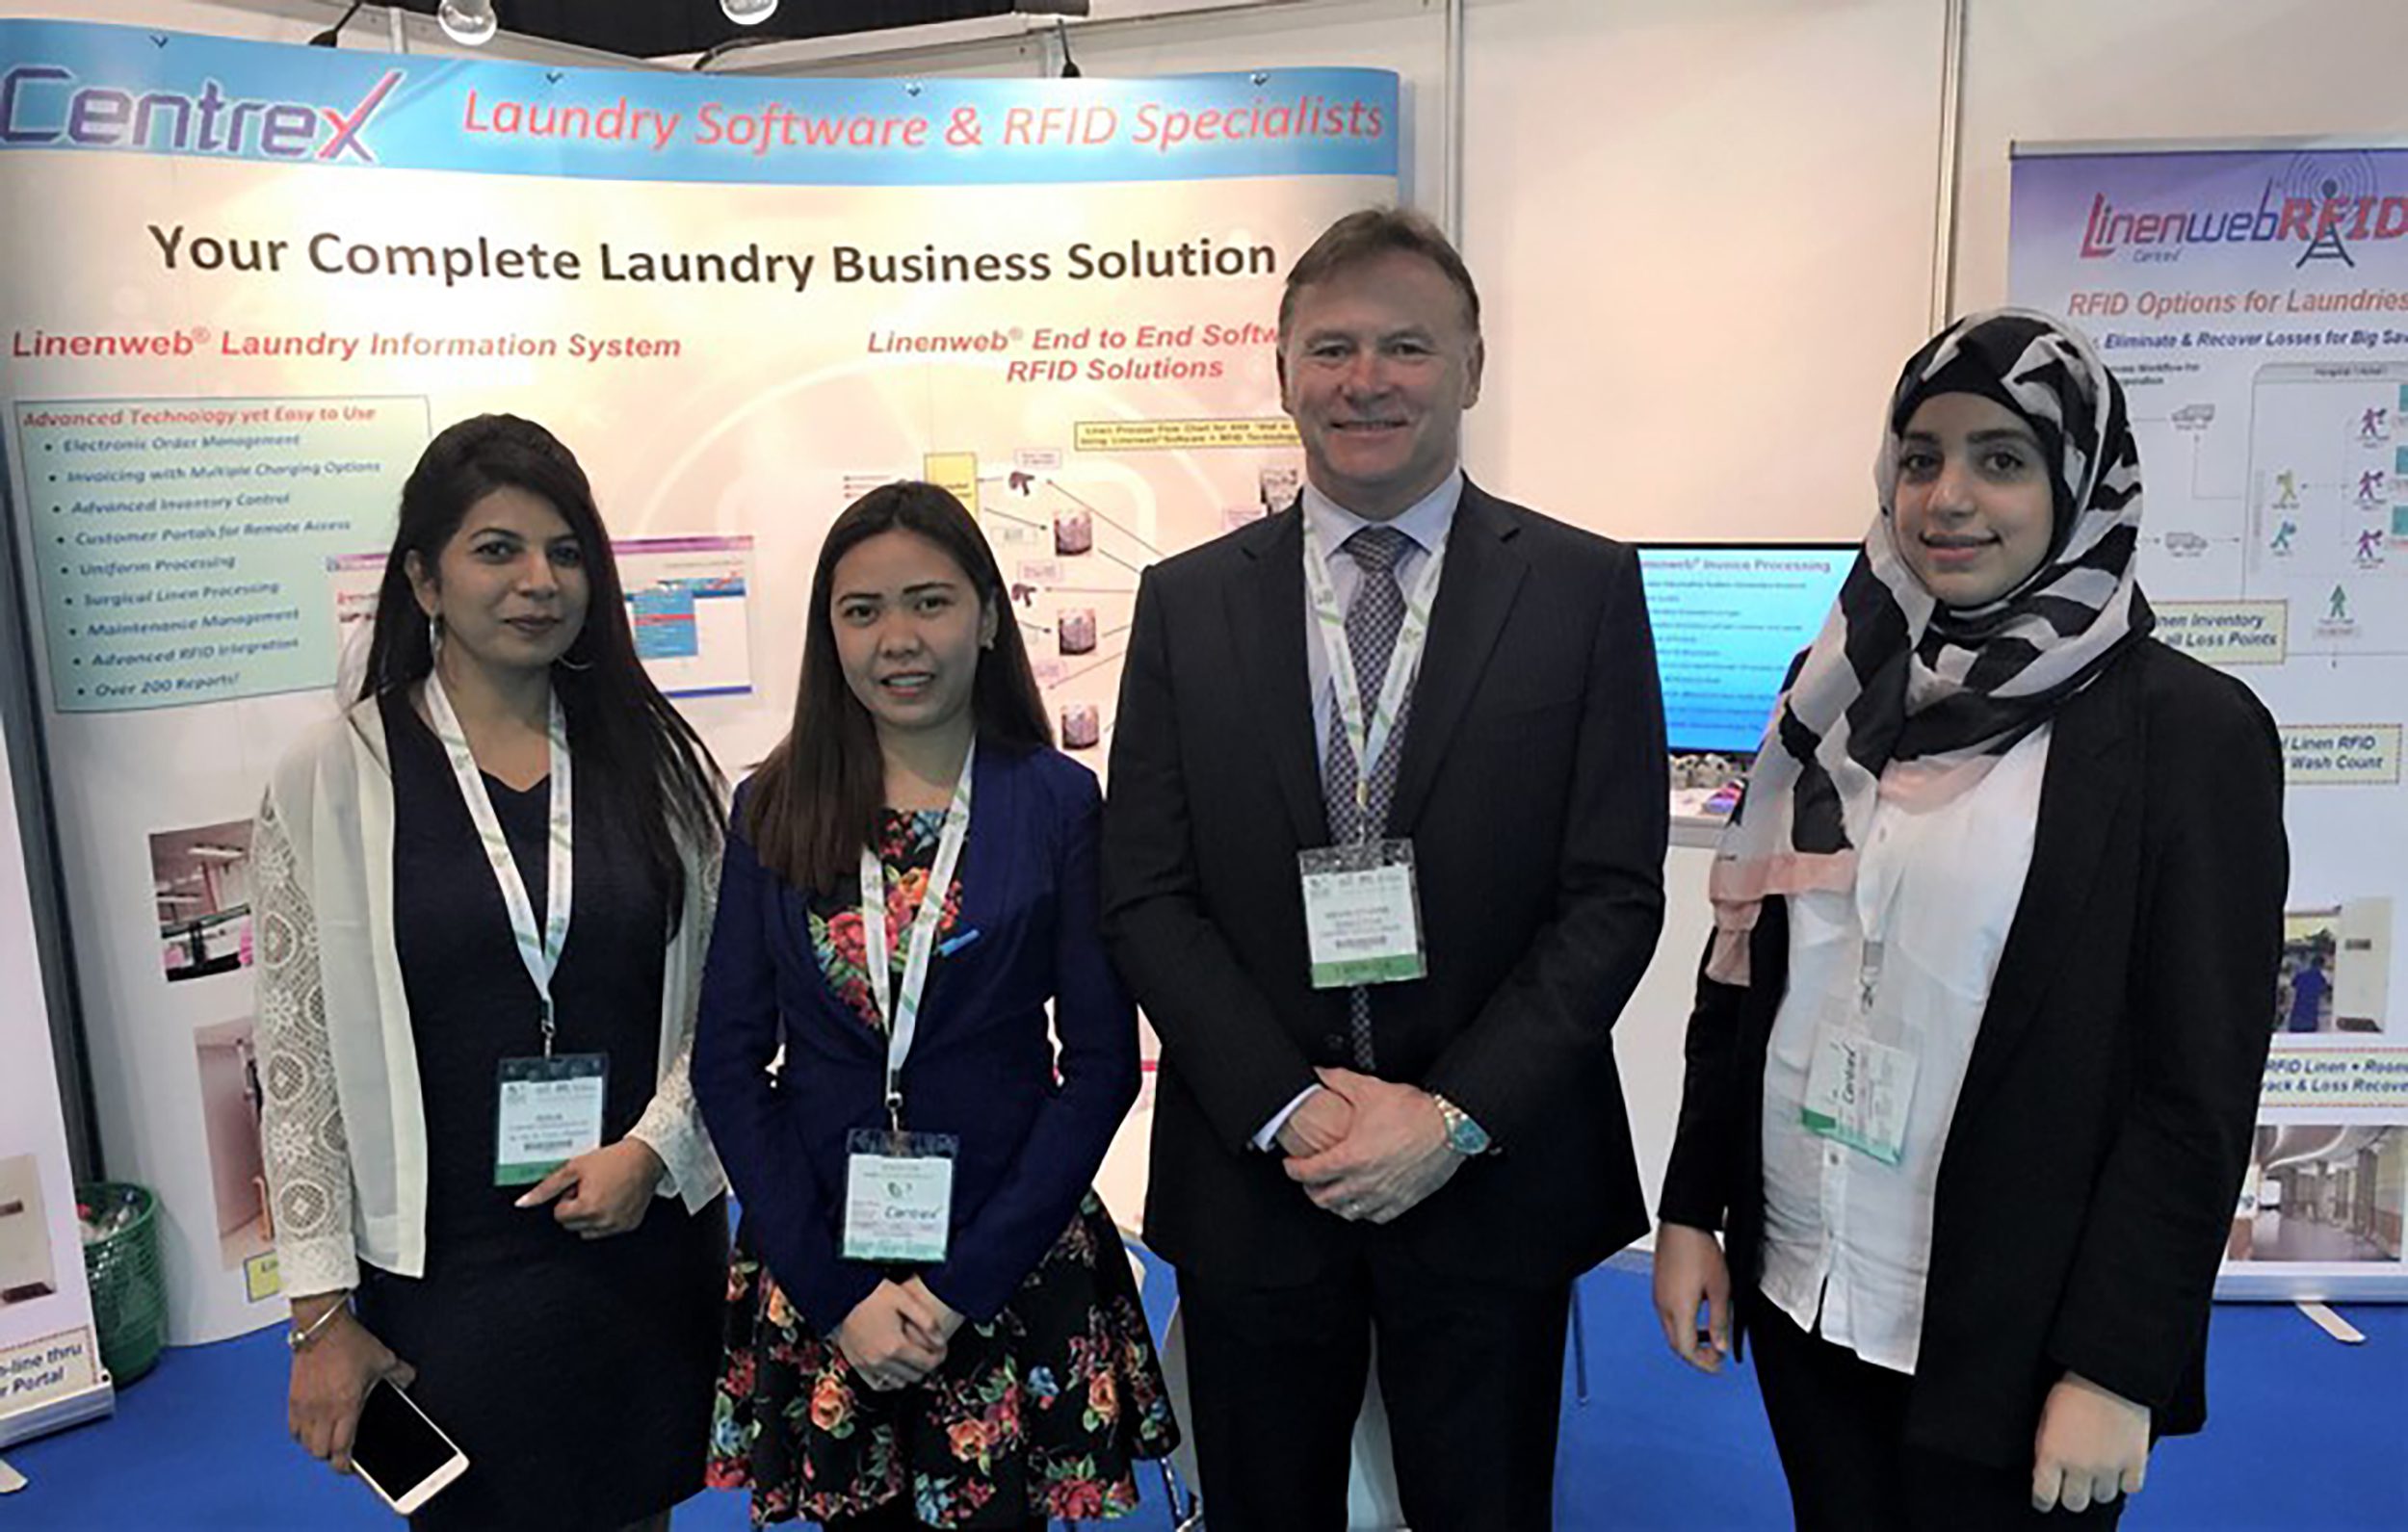 Centrex Technologies Director Kevin O’Hara and staff at Gulf Laundrex exhibition in Dubai